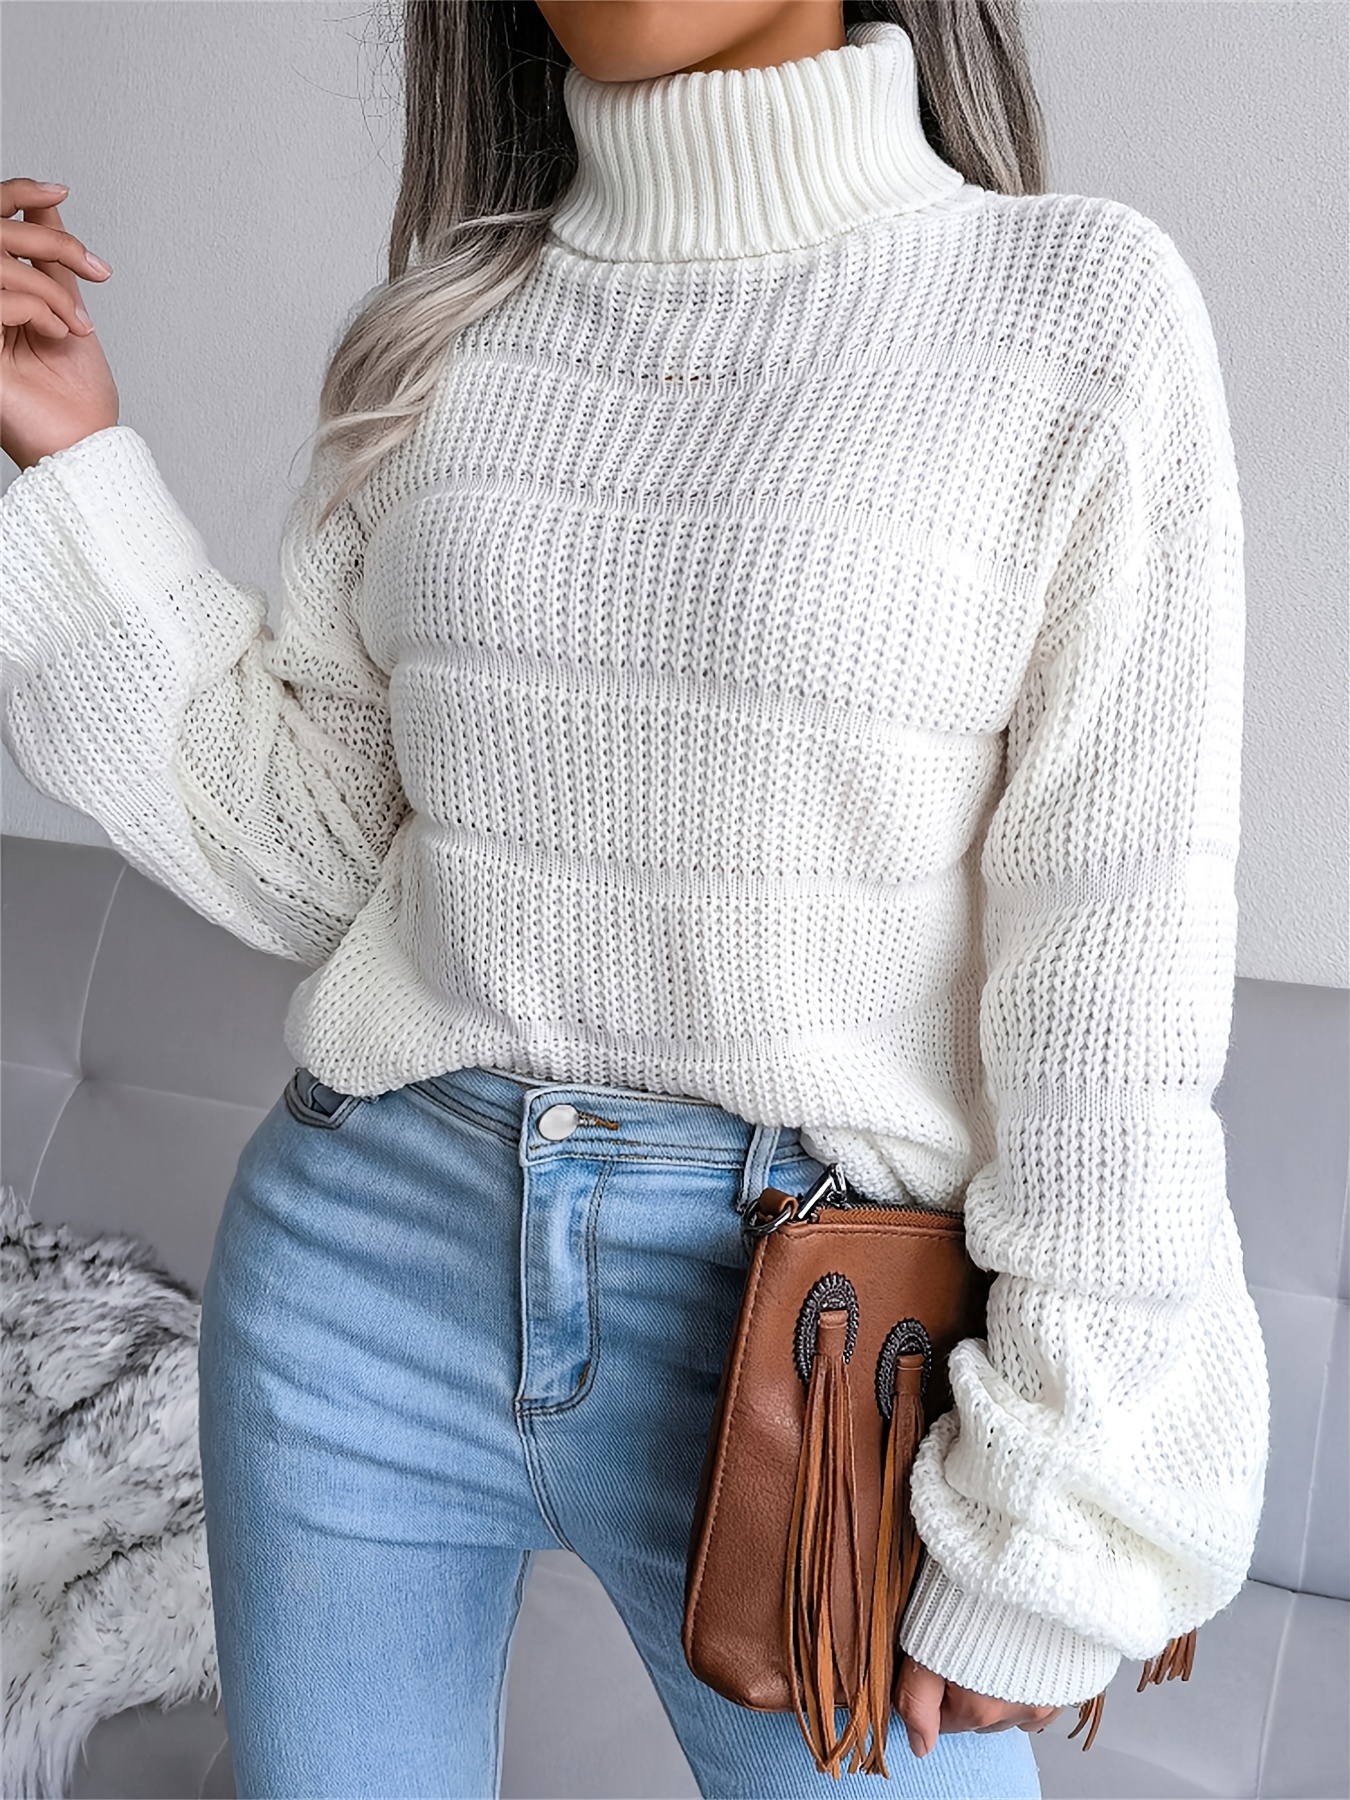 PENGXIANG Clearance Sale!Fashion Half Turtleneck T Shirt Women Simple  Casual Solid Color Slim Knitted T Shirts New A 